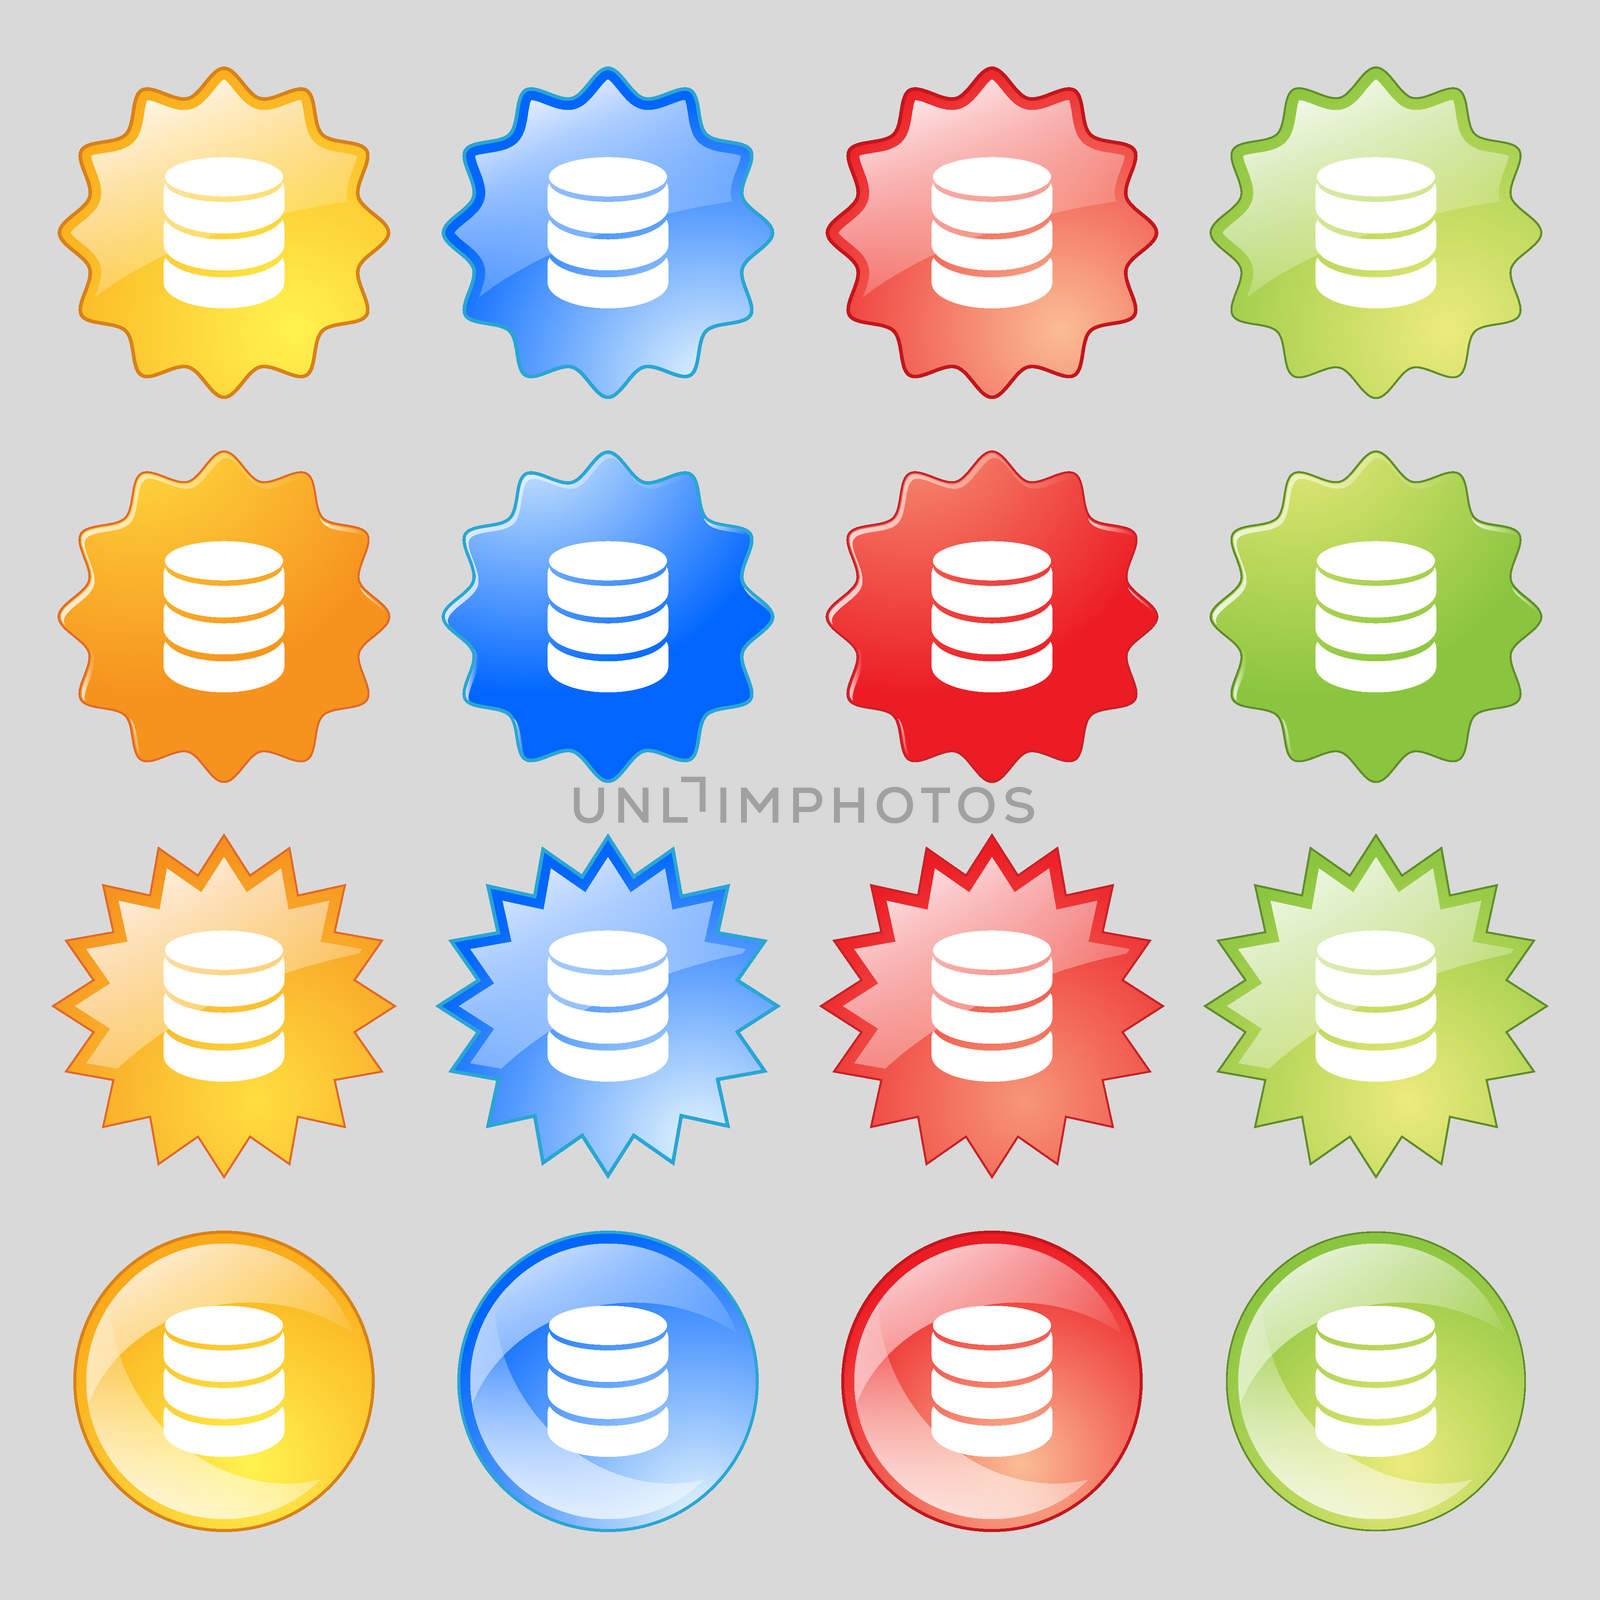 Hard disk and database sign icon. flash drive stick symbol. Big set of 16 colorful modern buttons for your design. illustration